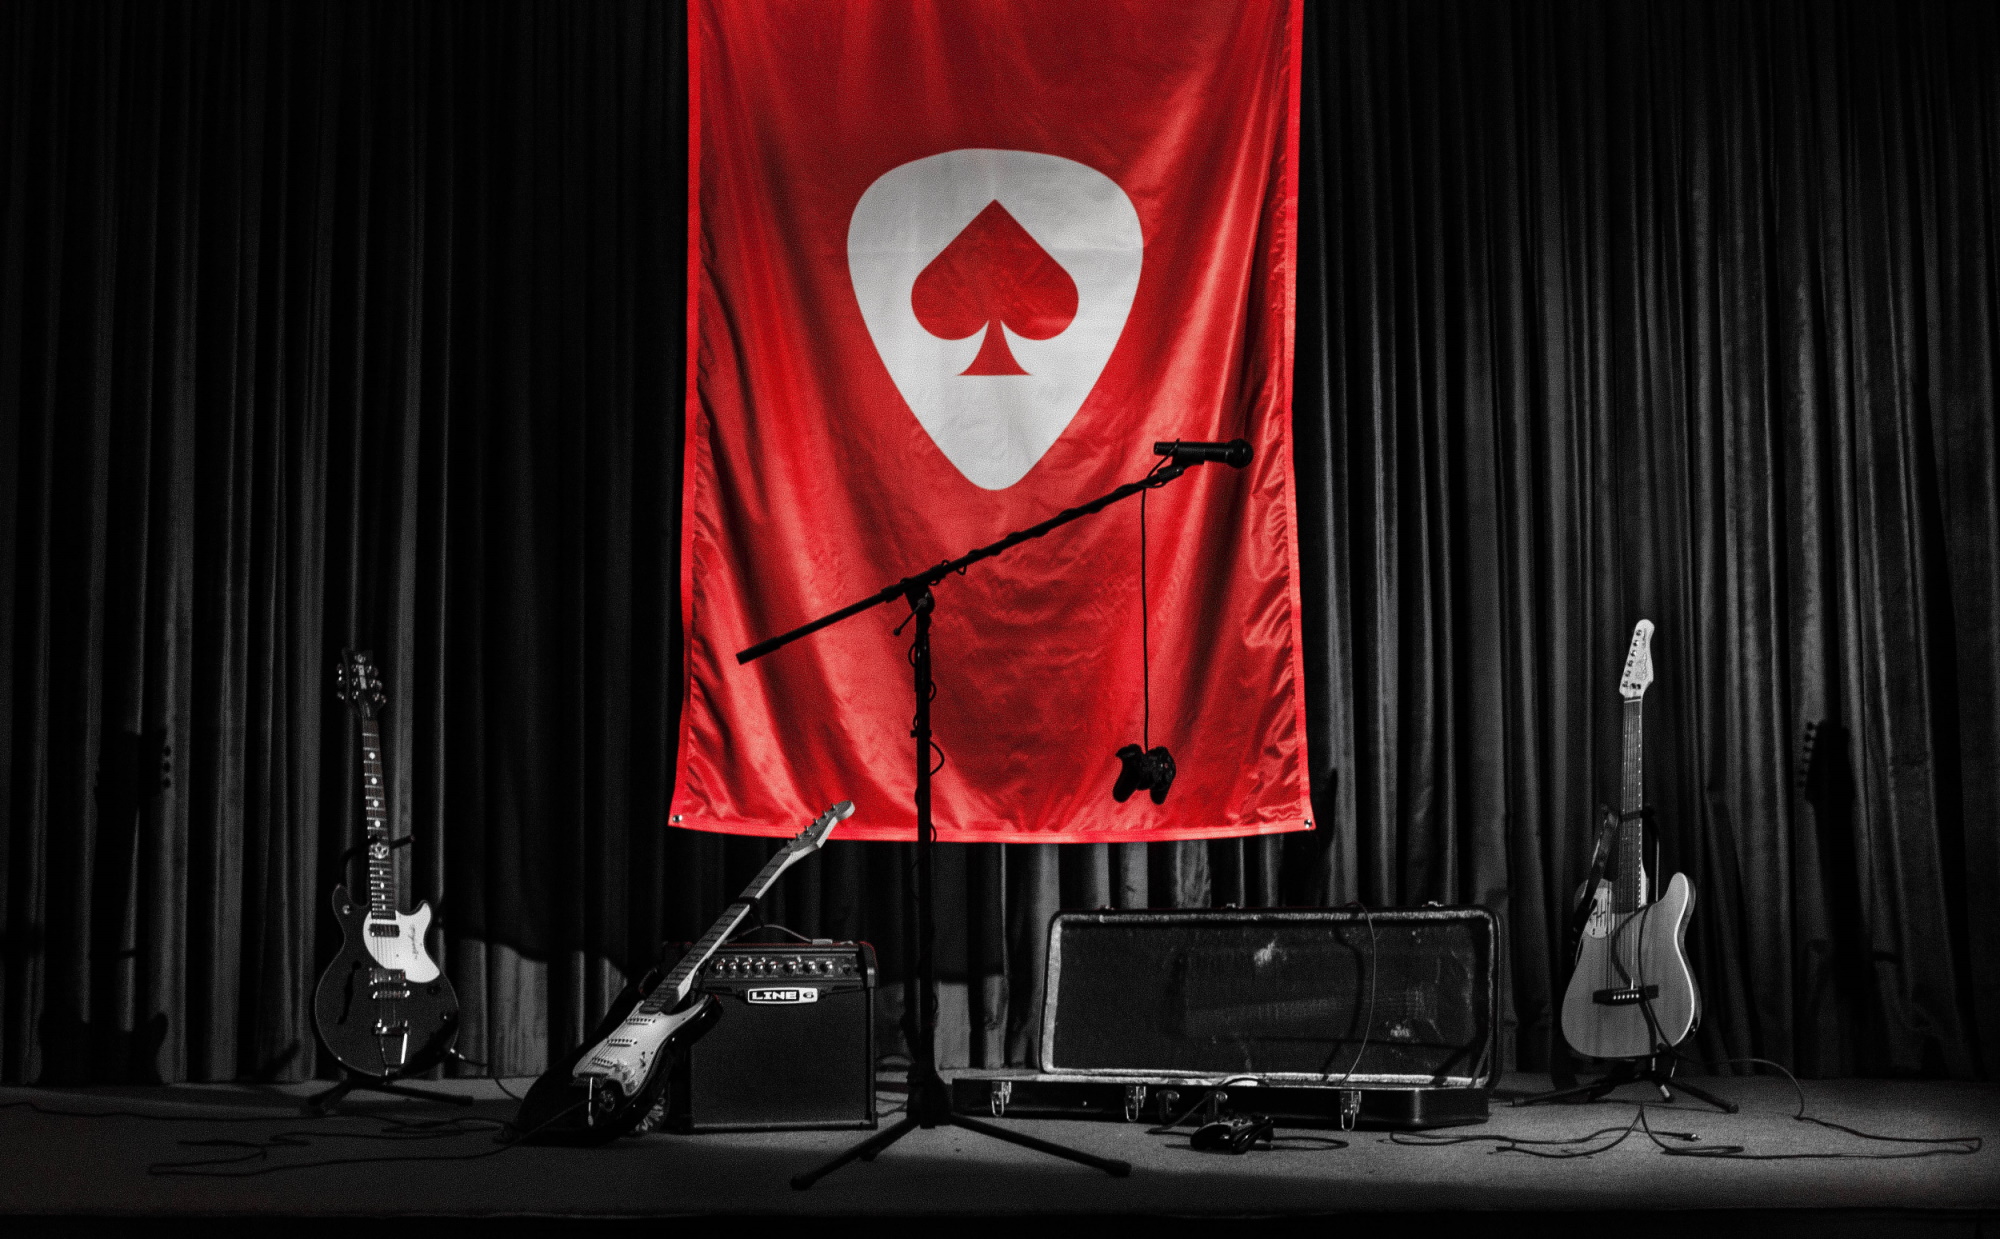 The Game Band logo on a flag behind several instruments.